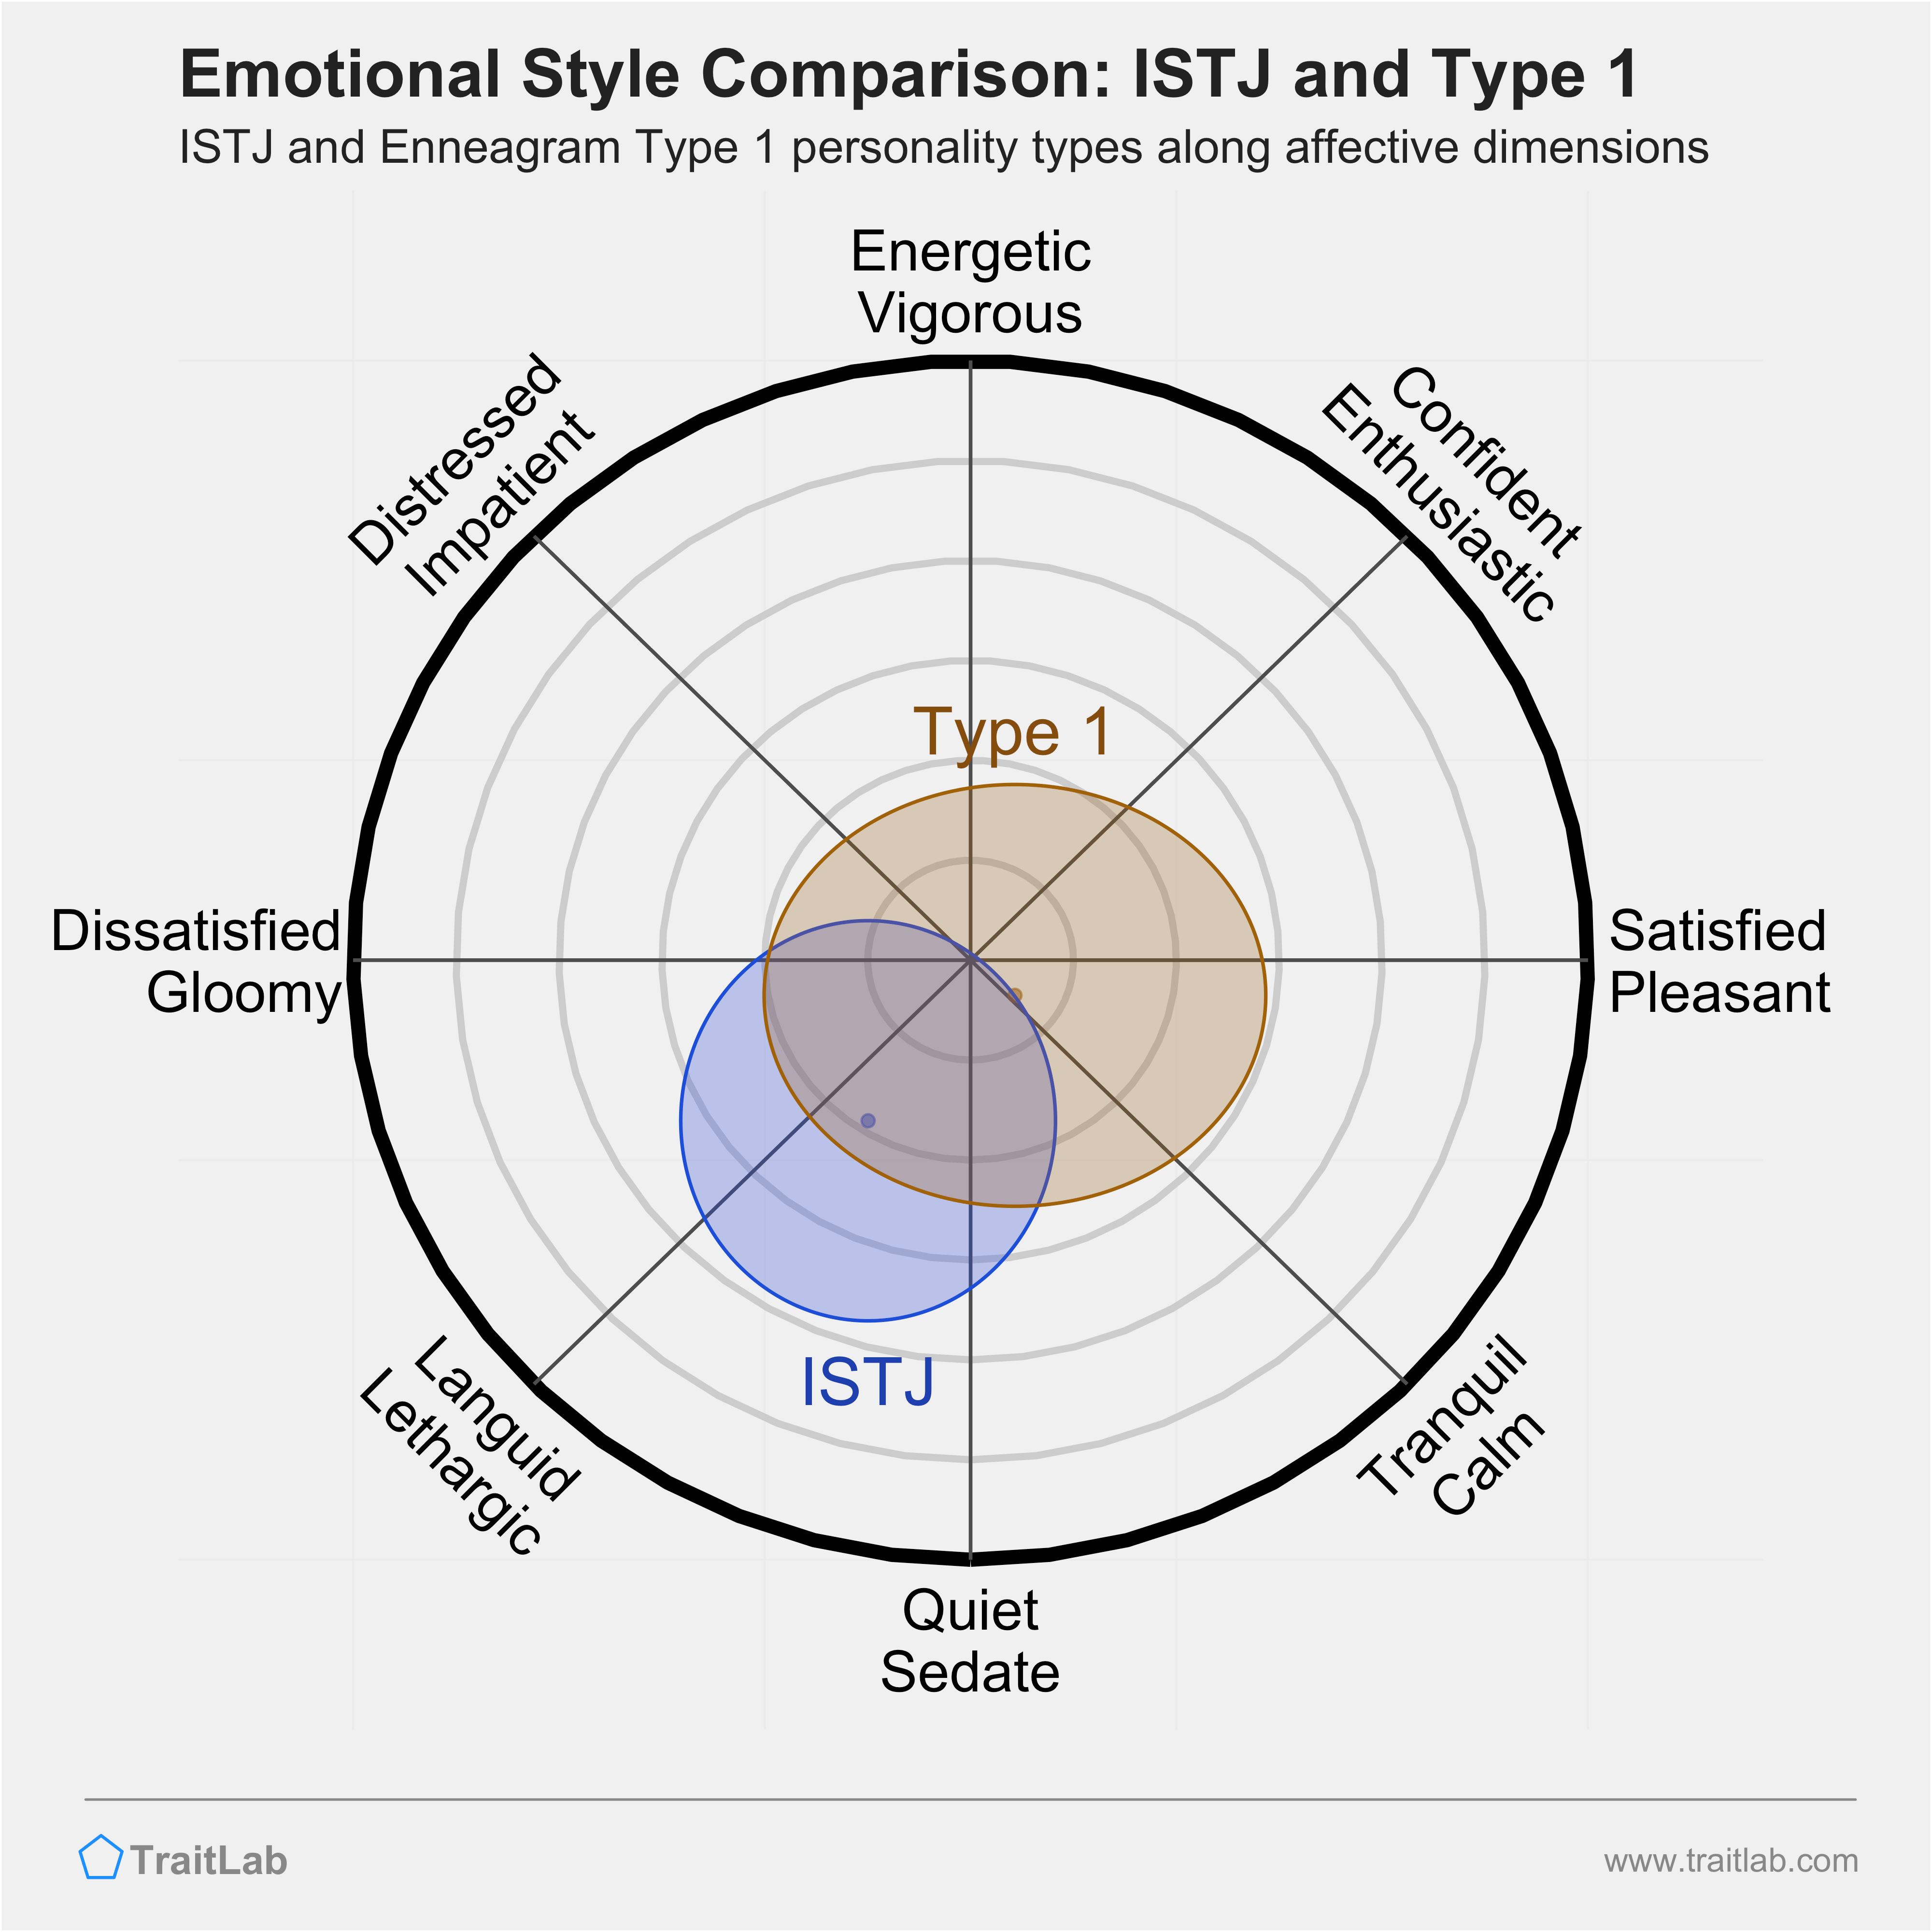 ISTJ and Type 1 comparison across emotional (affective) dimensions